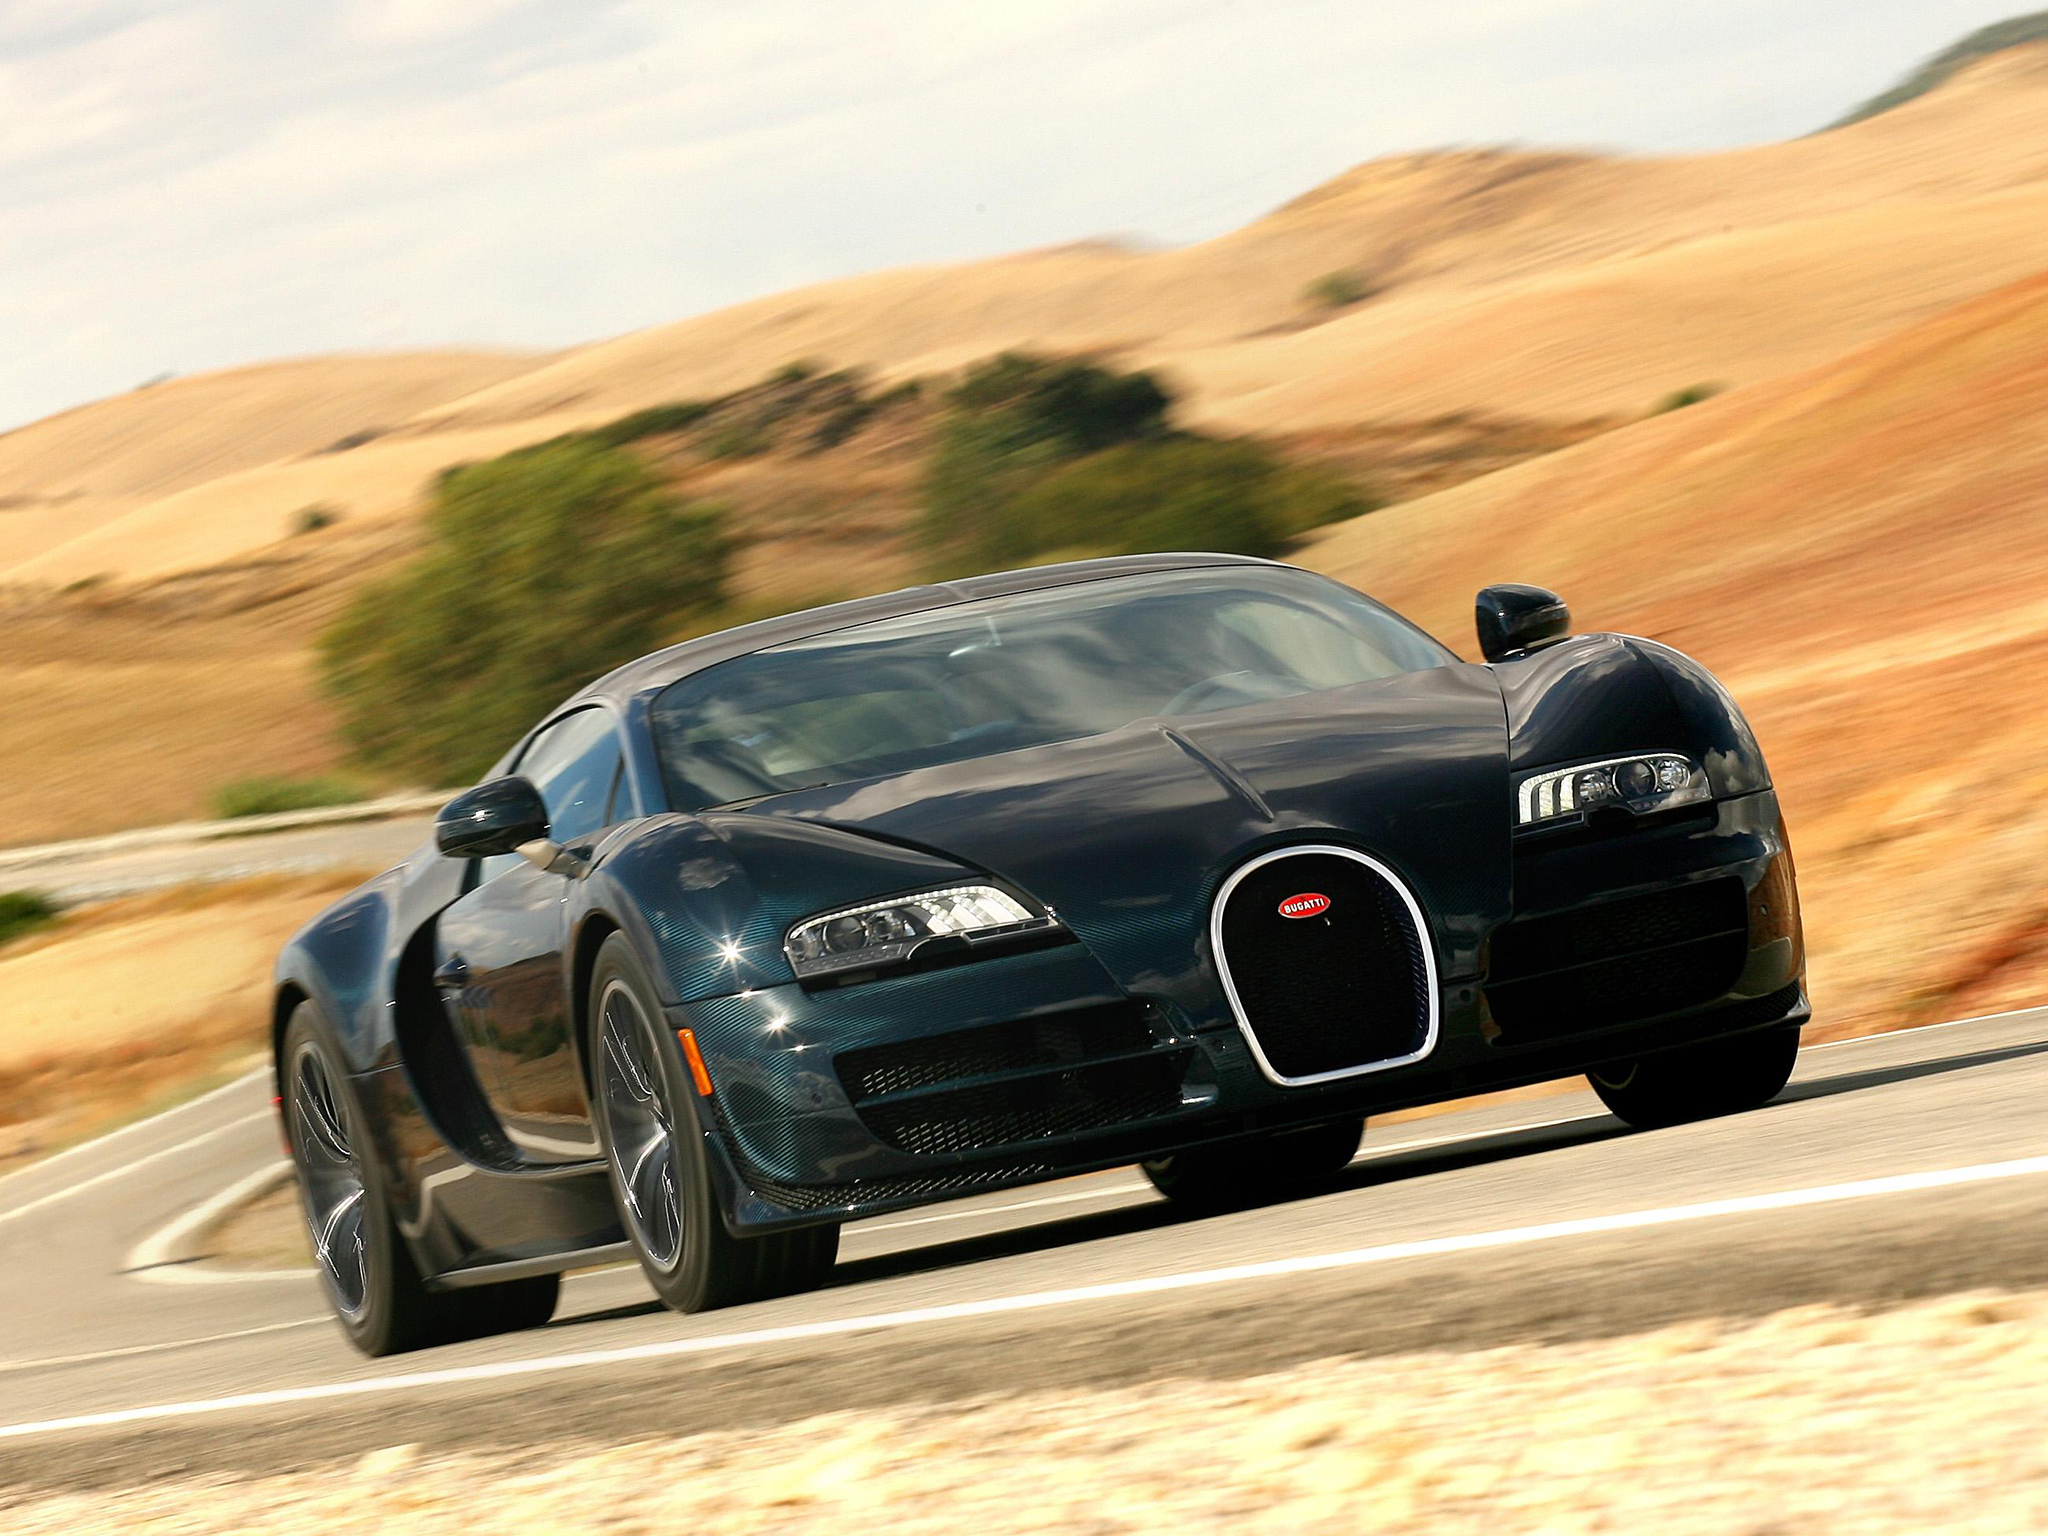 cars, bugatti veyron, sports, front view, sports car, 16 4 cell phone wallpapers